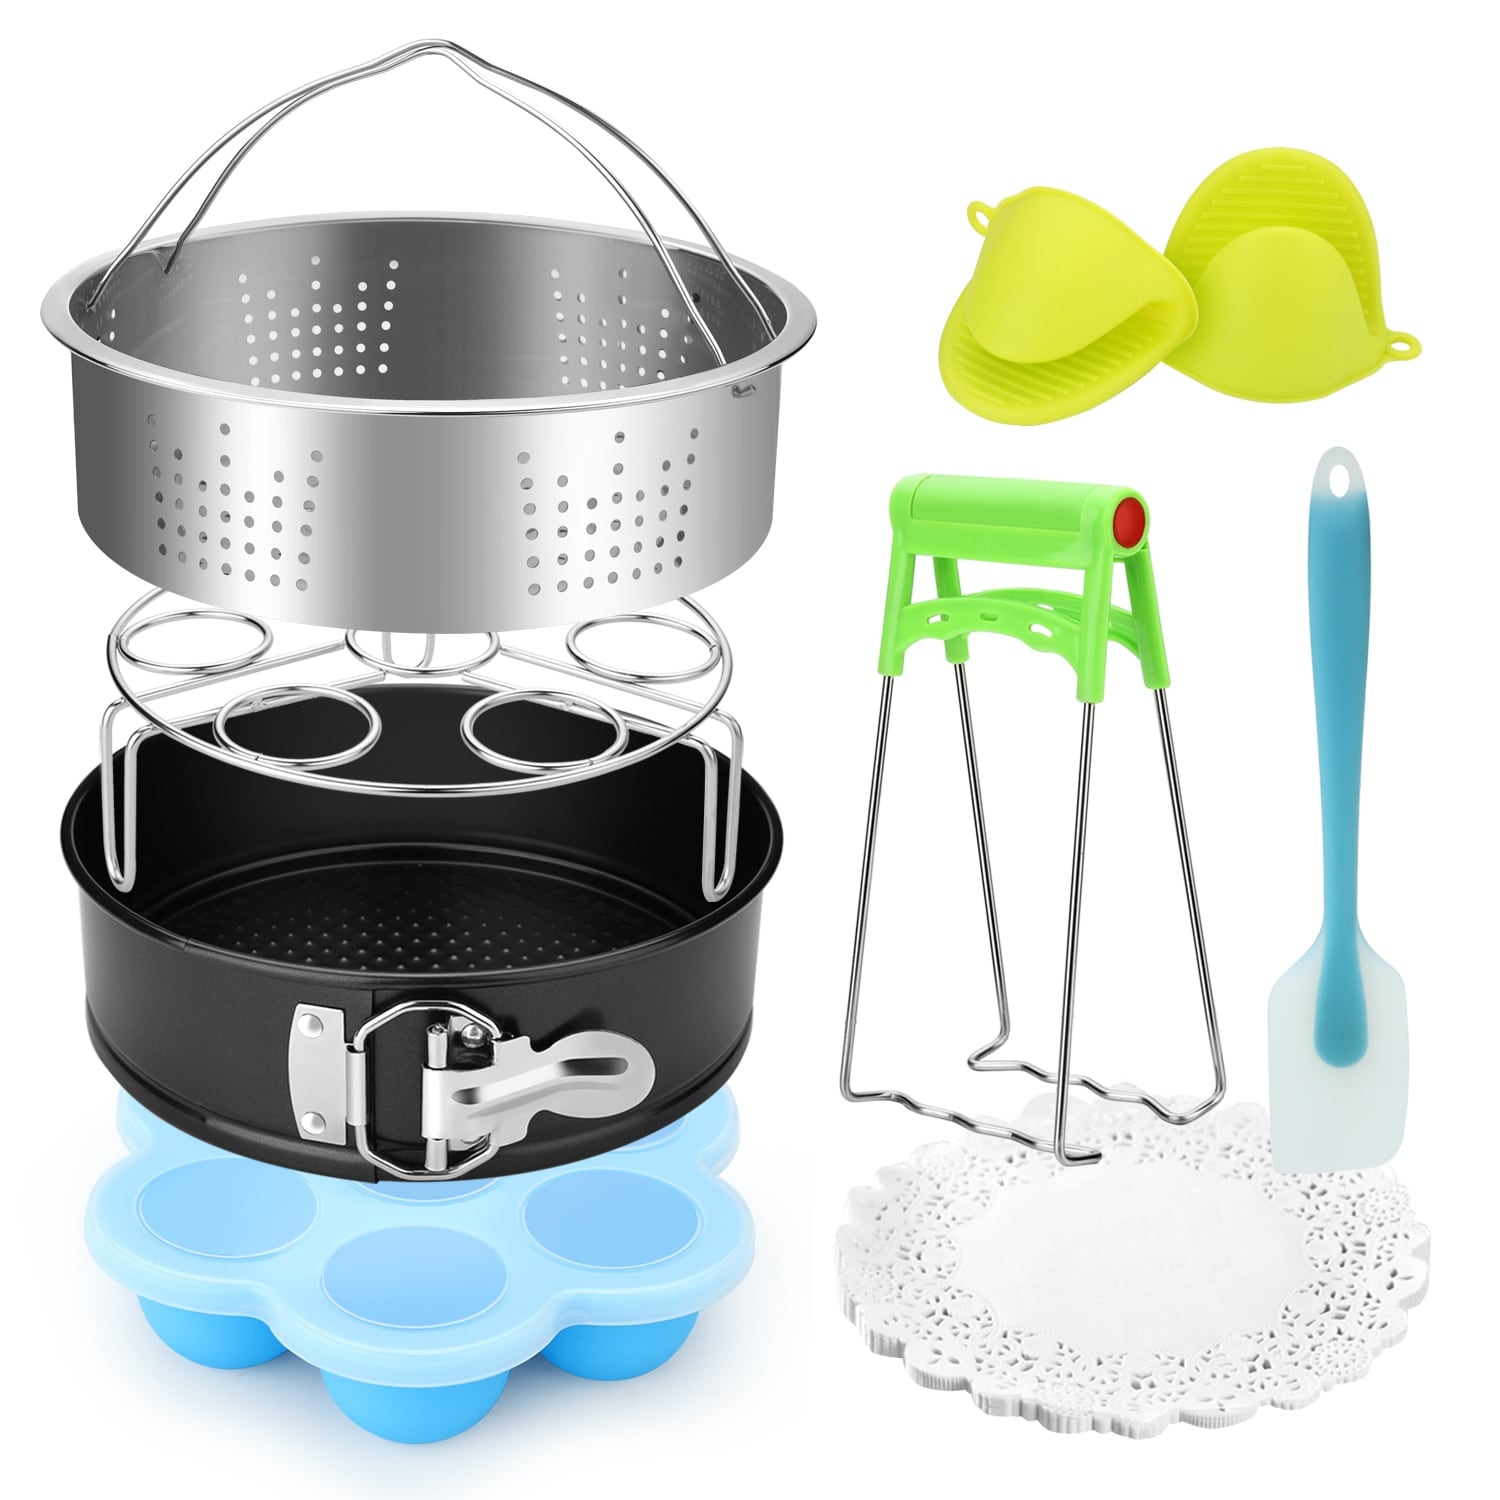  Instant Pot Accessories Steamer Basket,Fits Instant Pot 5, 6, 8  Quart Pressure Cooker with Egg Steaming Rack and Kitchen Silicone Tongs,  Stainless Steel 3 Pcs Set: Home & Kitchen